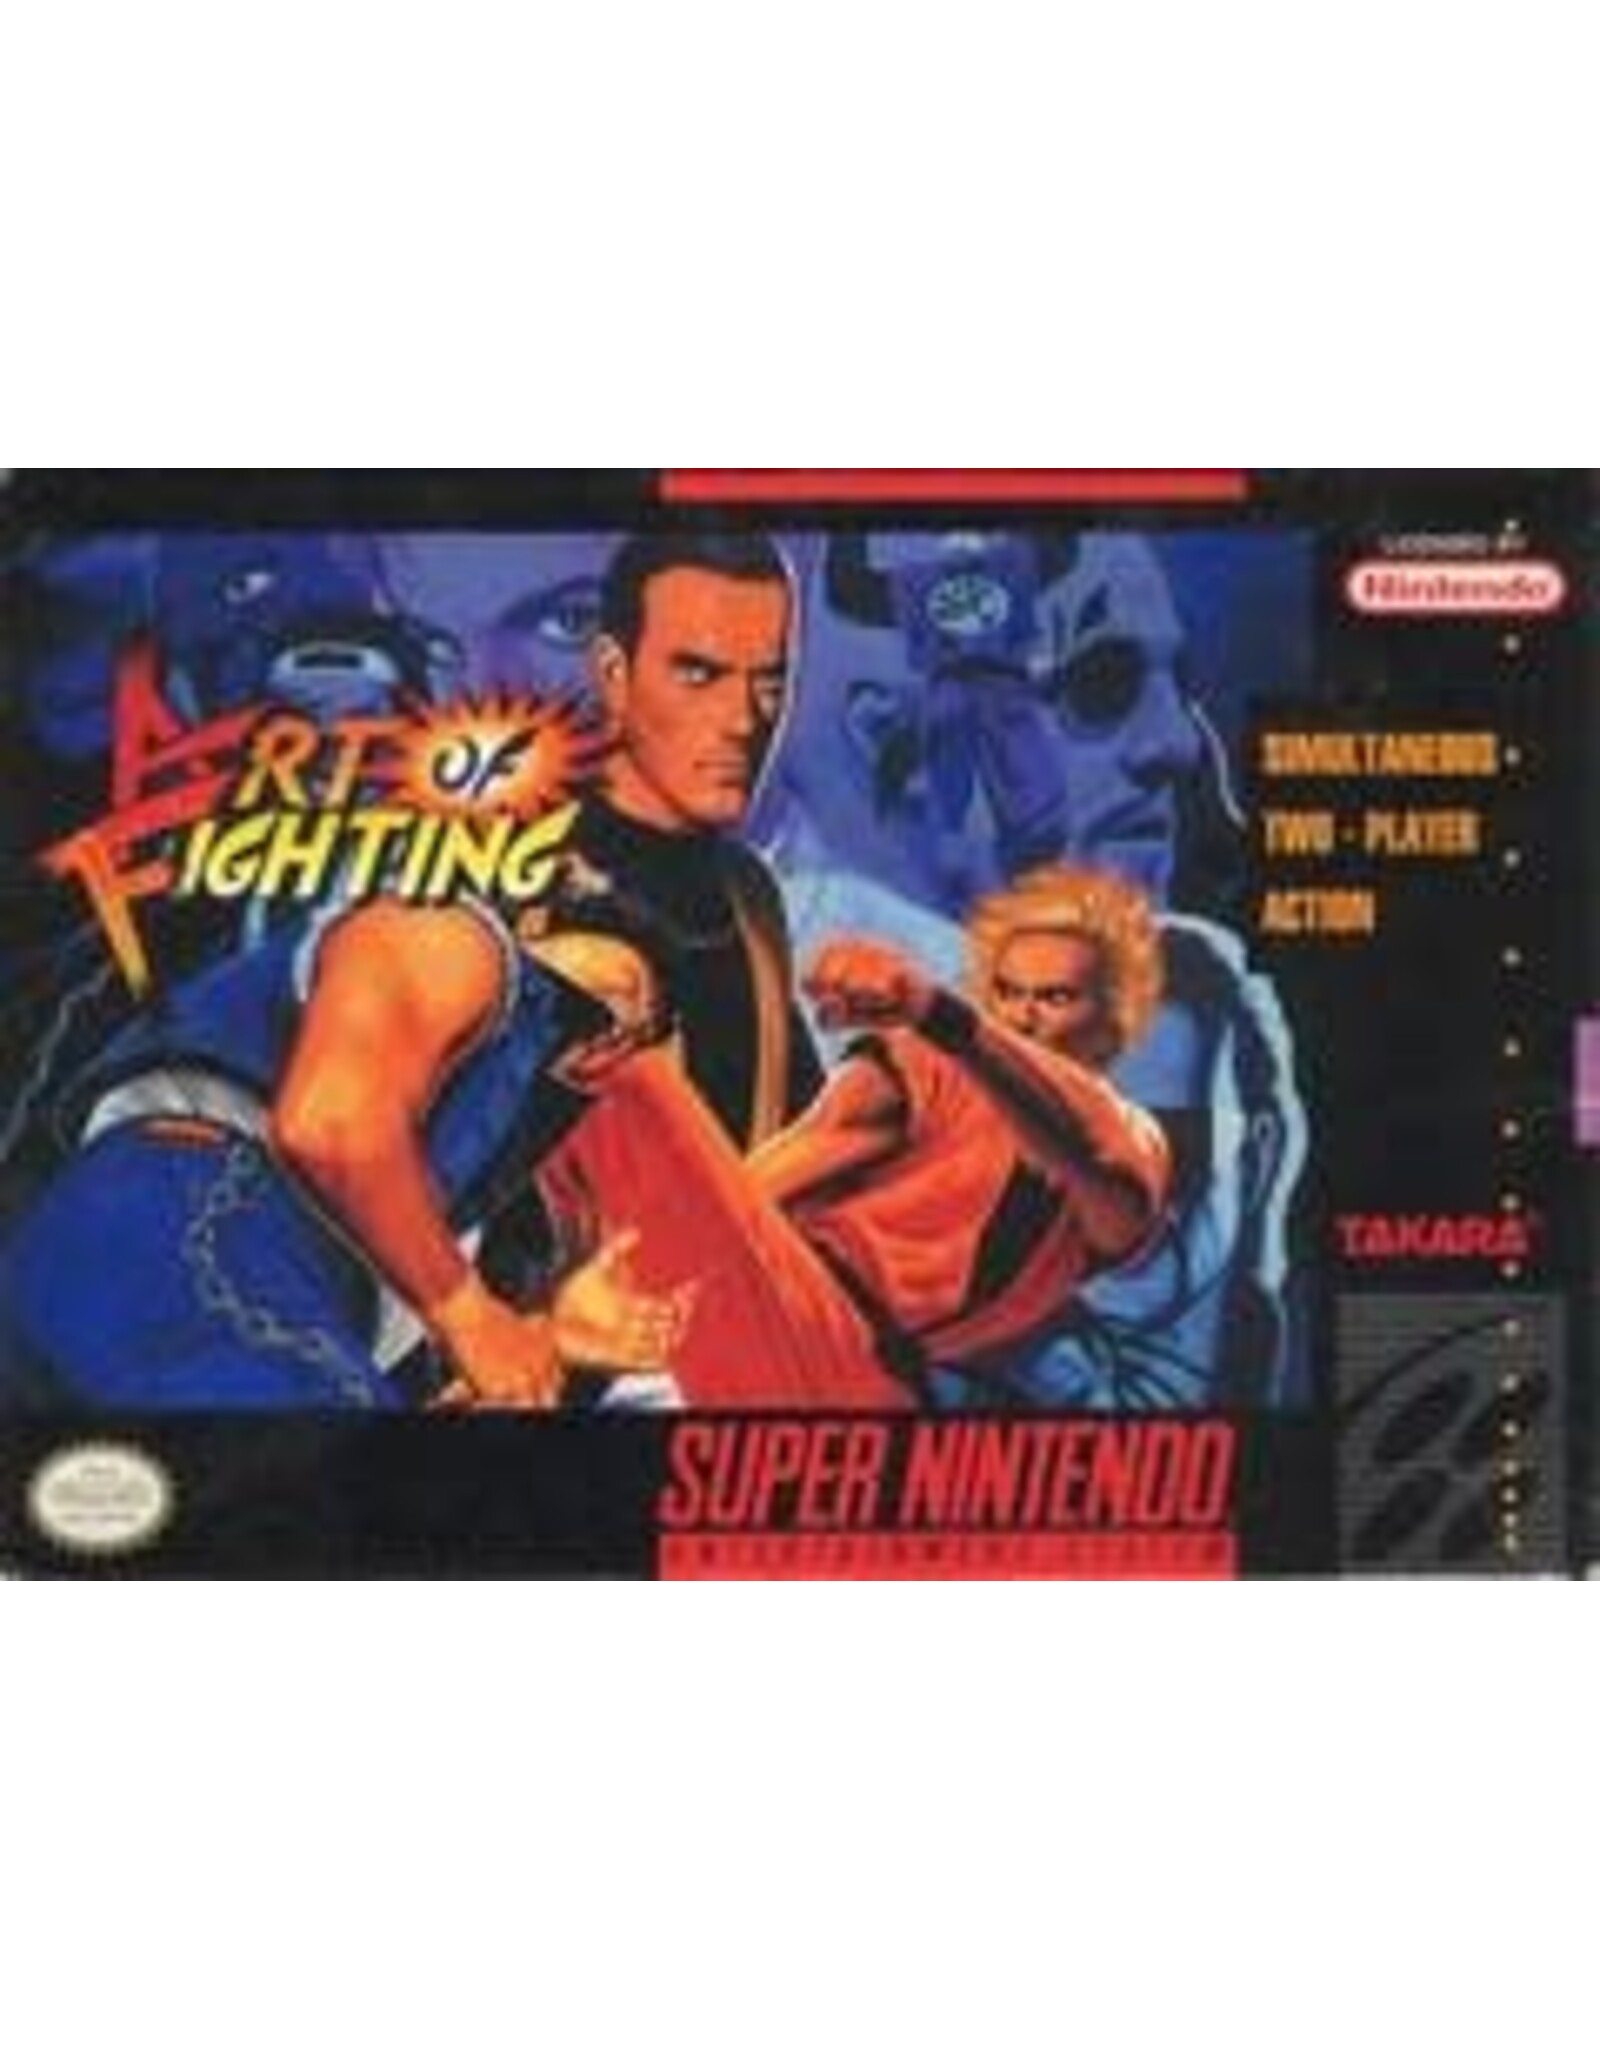 Super Nintendo Art of Fighting (Cart Only, Damaged Label and Cart)